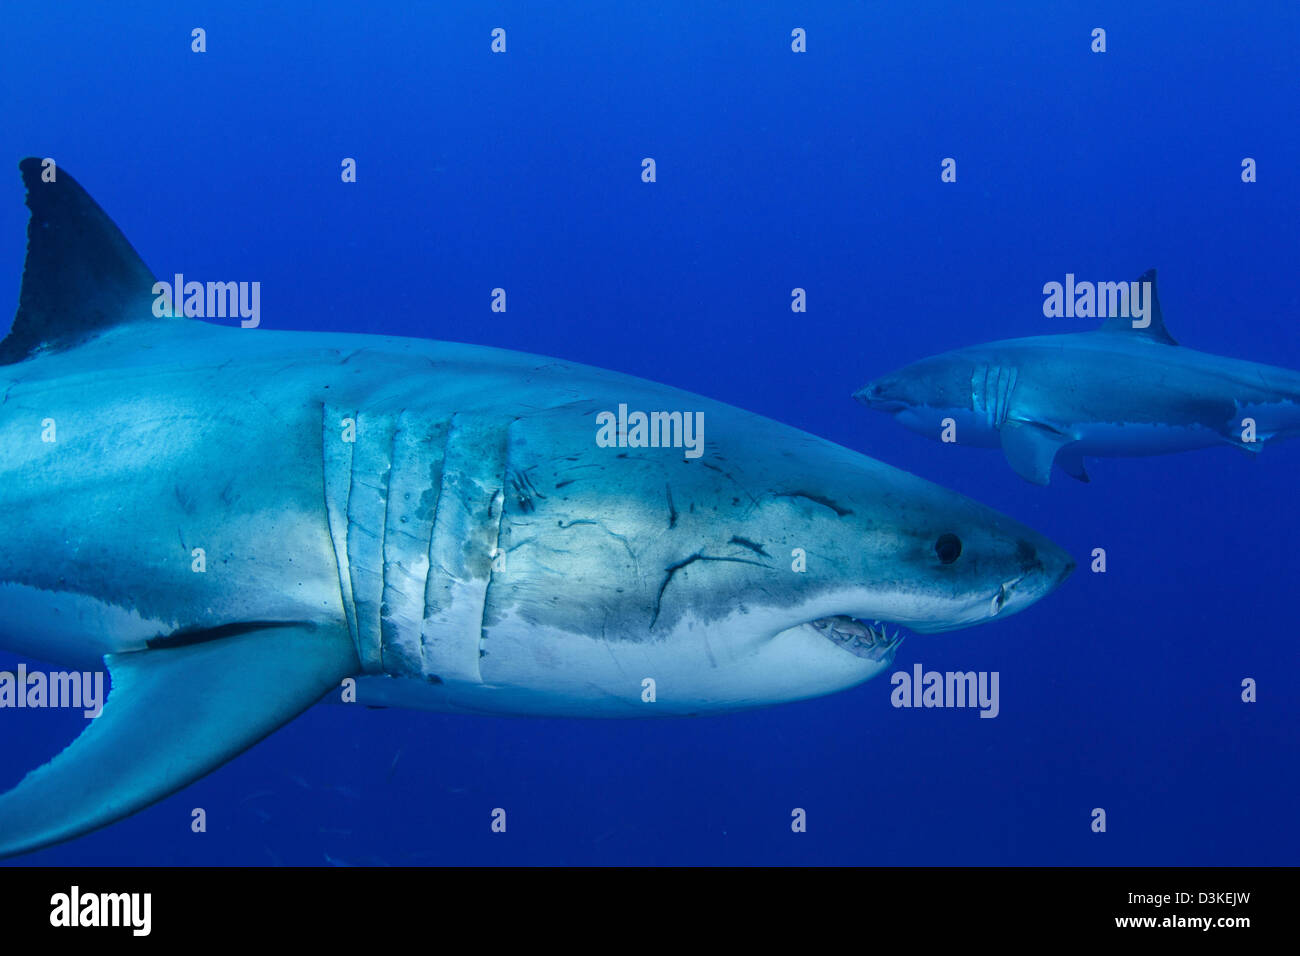 Pair of male great white sharks, Guadalupe Island, Mexico. Stock Photo